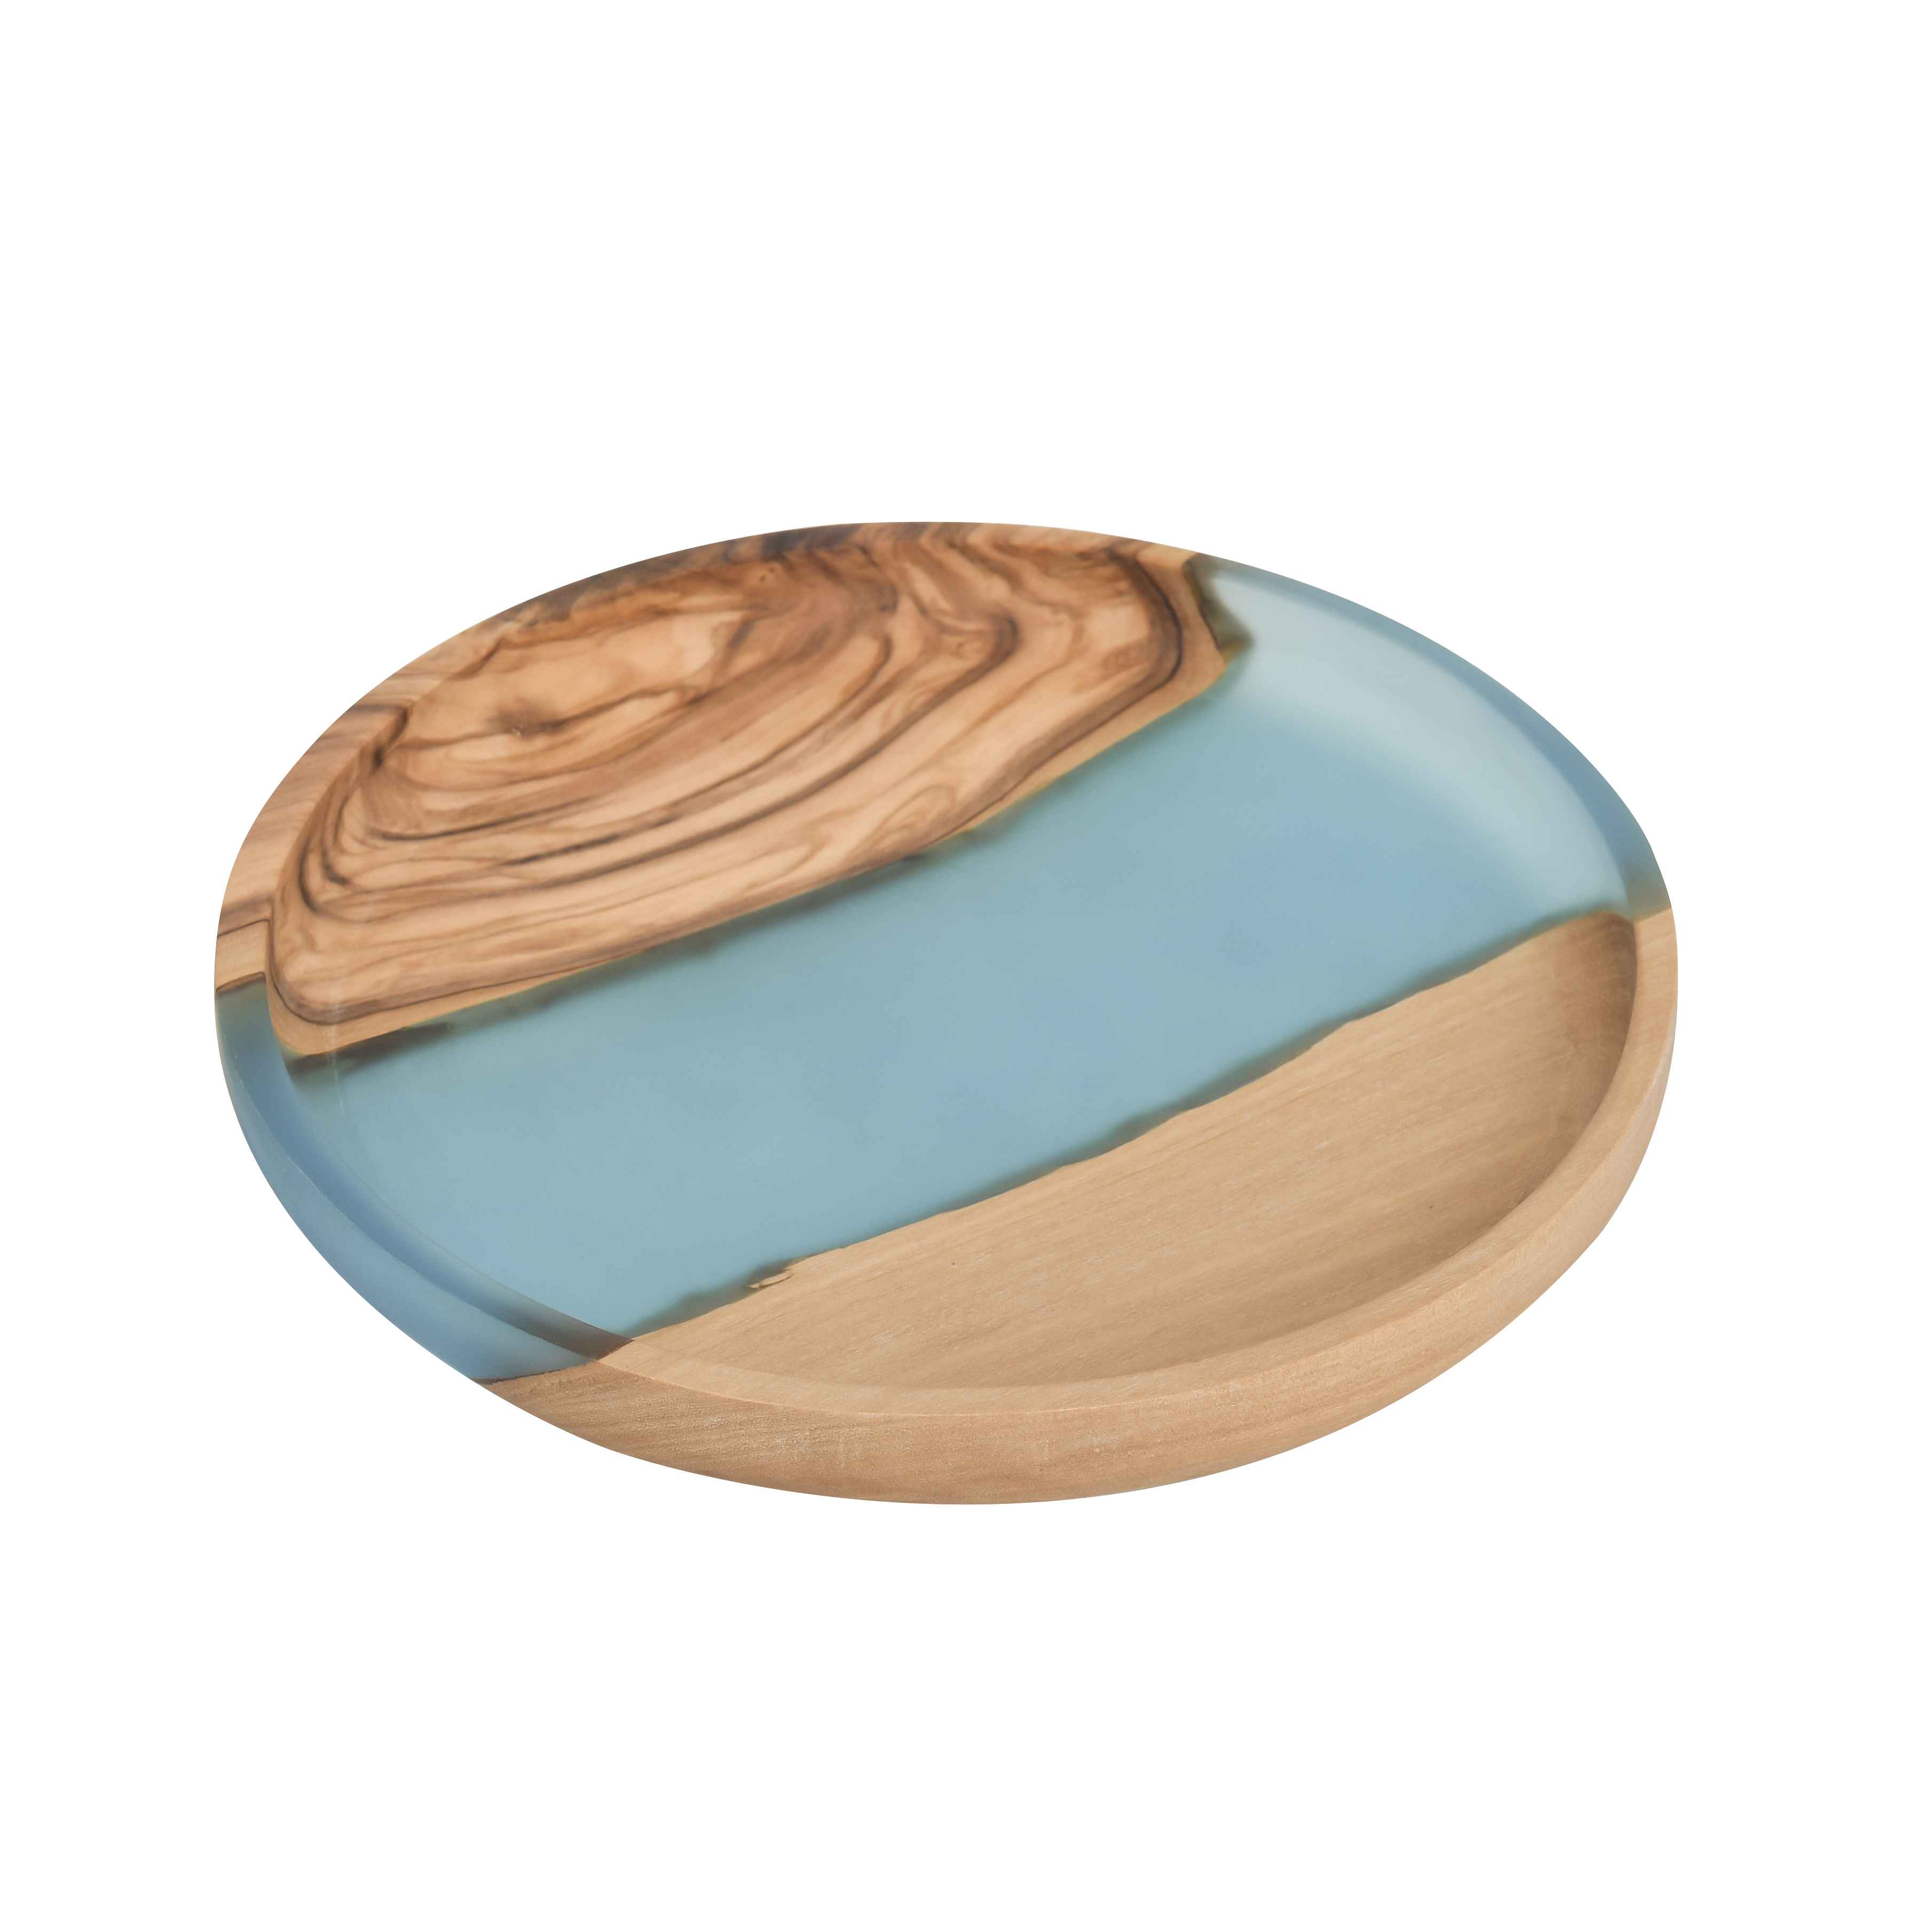 Olive Wood Round Tray with Blue Resin for Kitchen / Decor